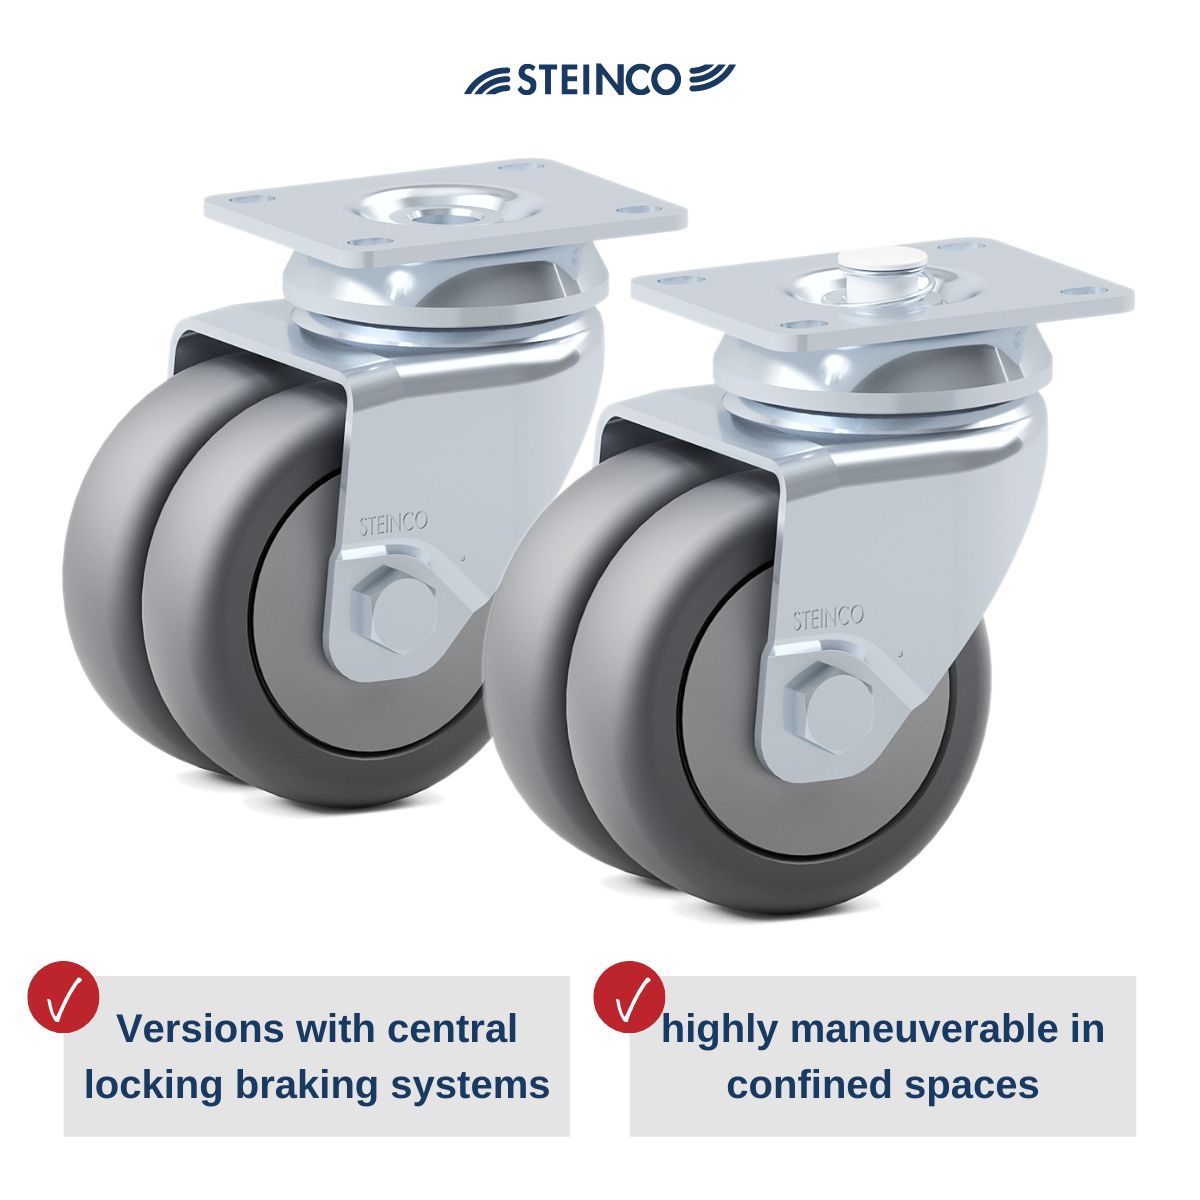 Wheels & Castors for Airplane Serving Trolley & Bar Trolley in Premium Quality - Aviation Castors for Serving Trolley & Trolleys made of stainless steel and plastic.